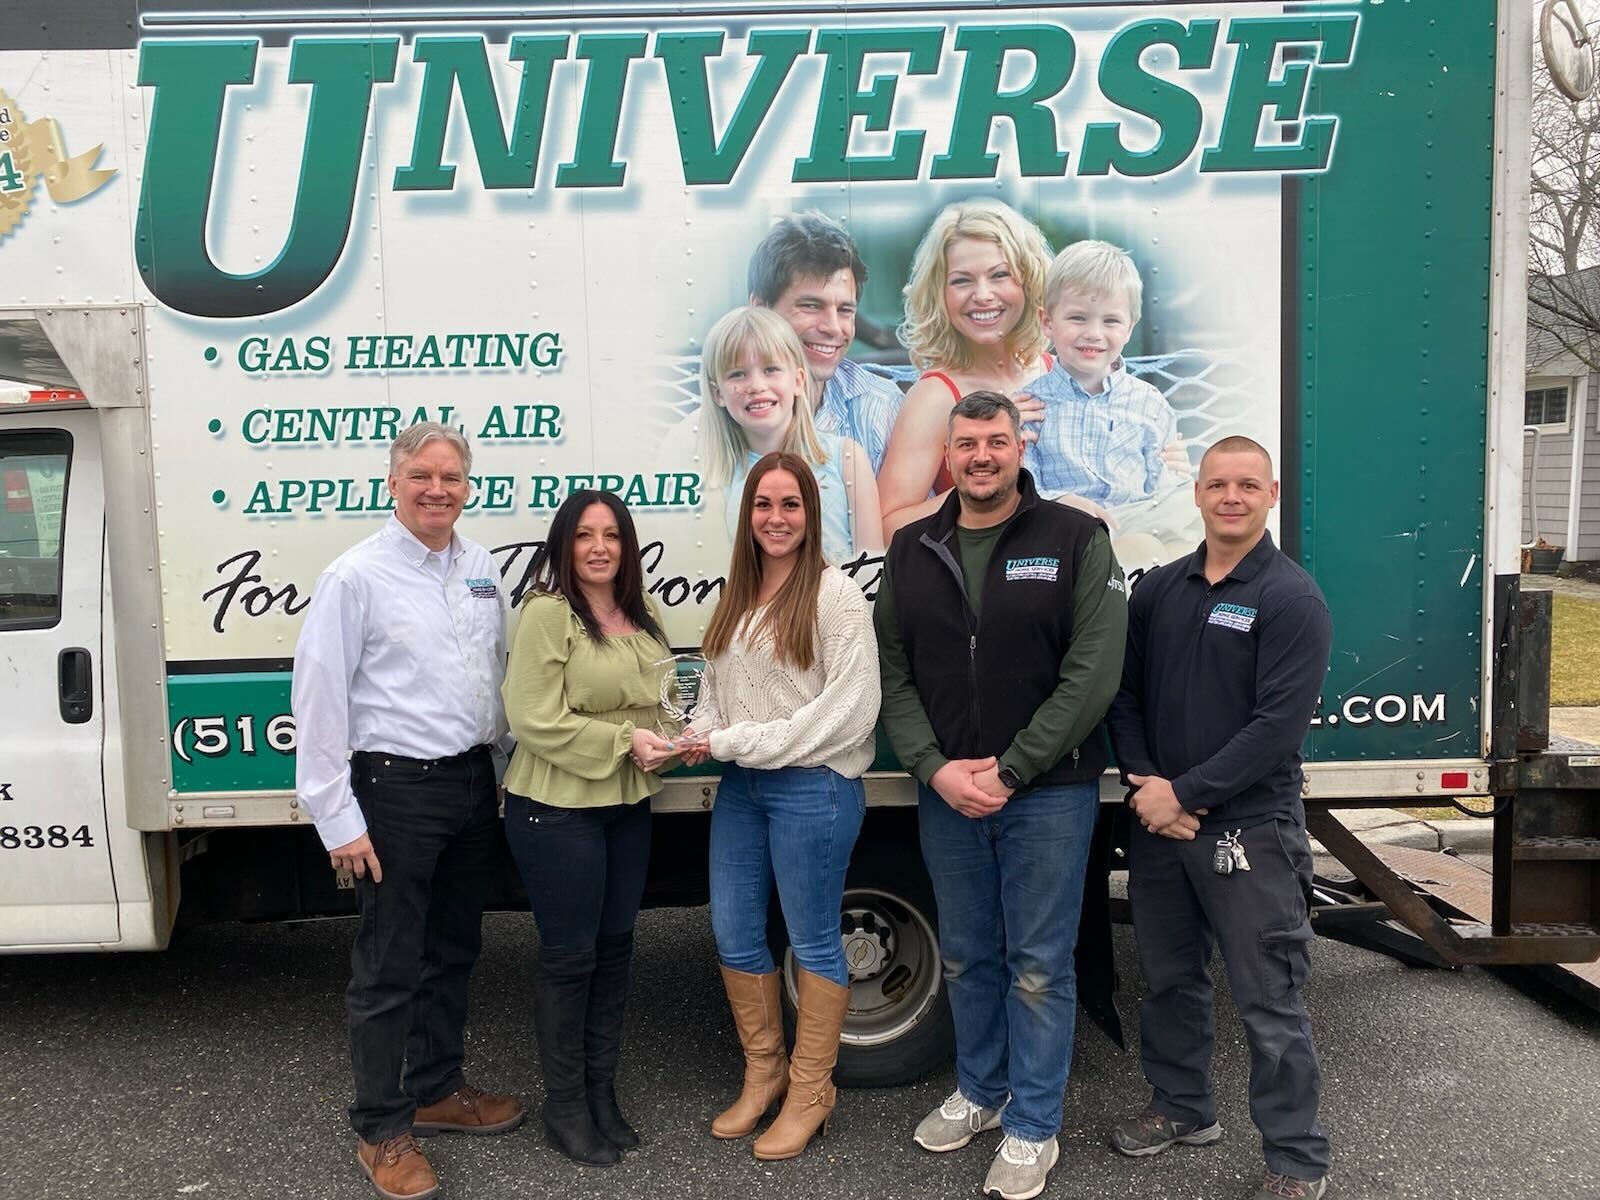 Pictured in front of one of their trucks (l-r) are: Bill Powell, Dawn Crowley, Taylor Papa, Jeffrey Schaefer and Scott Kelly of Universe Home Services.